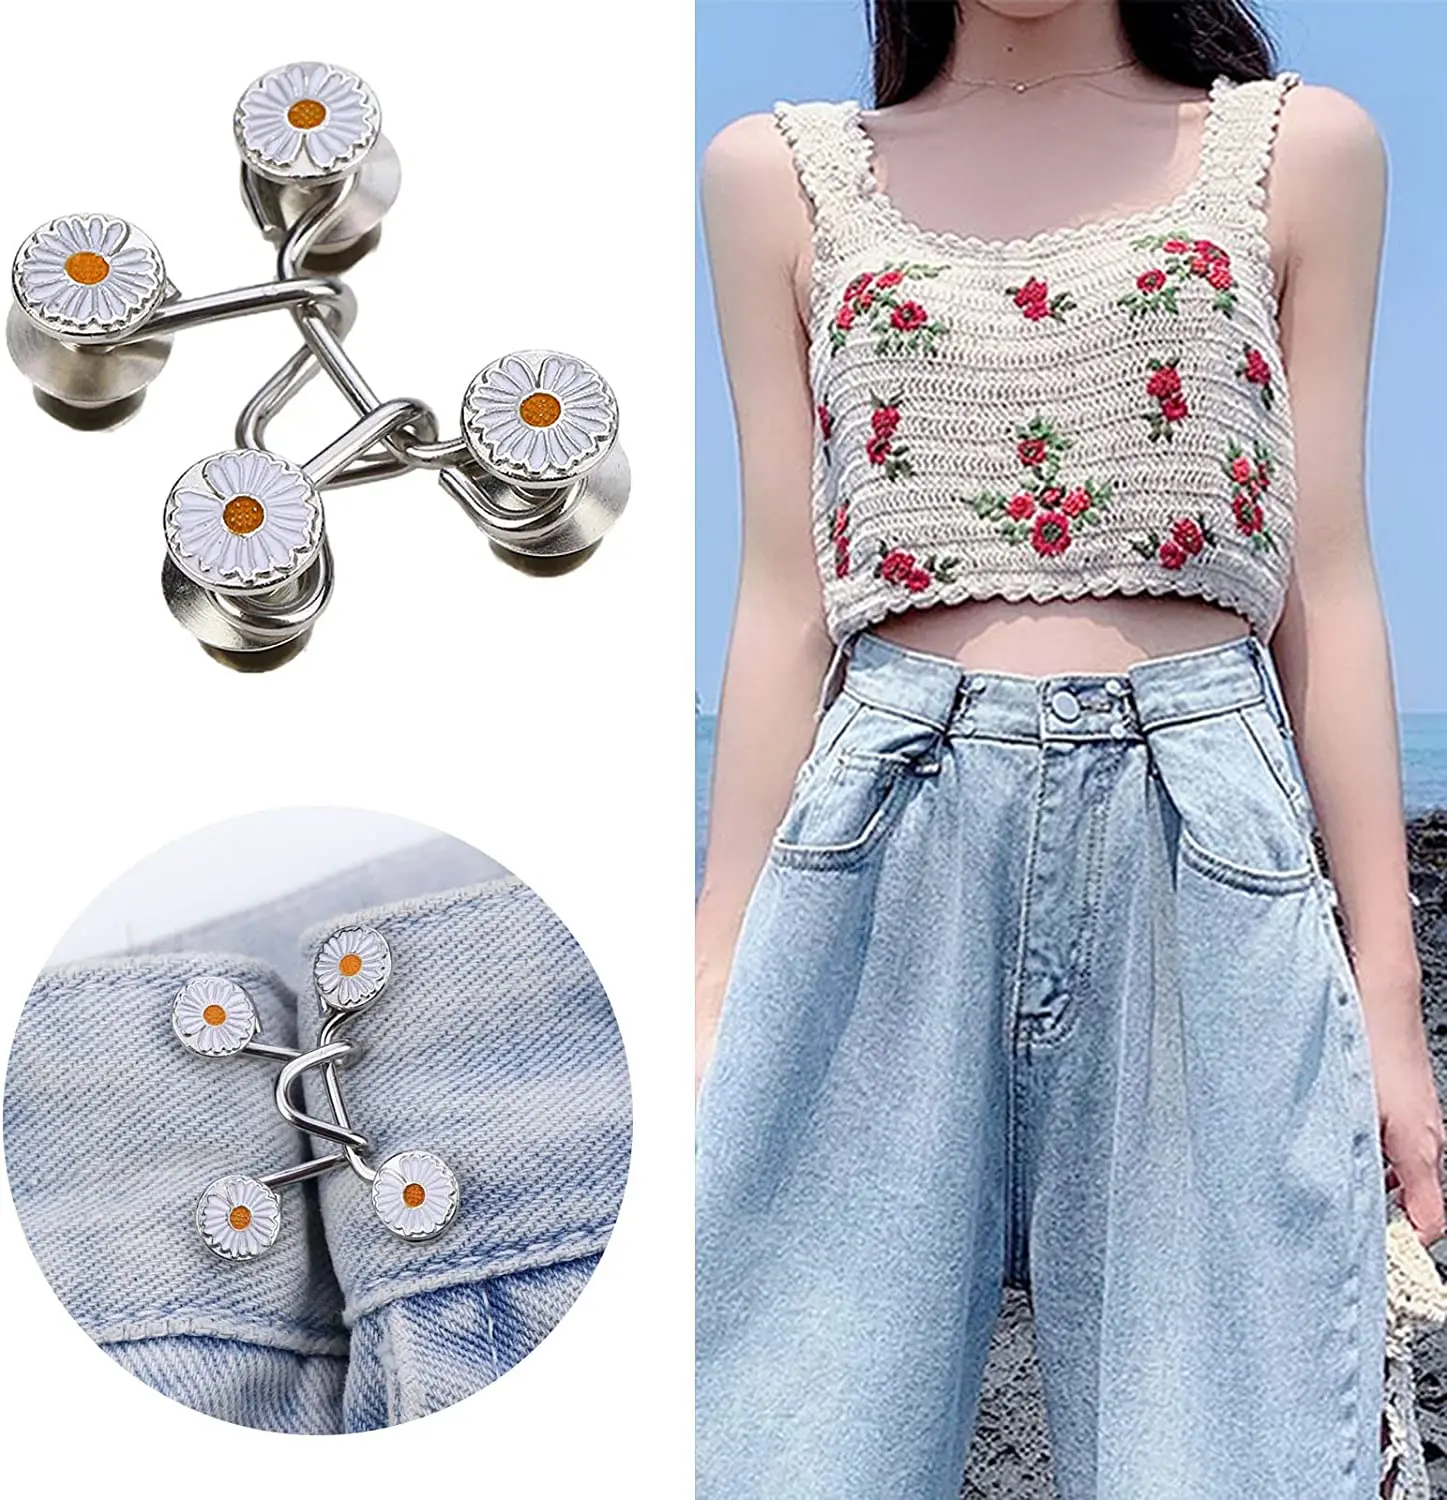 Daisy Button Pins for Jeans Adjustable Jean Buttons Pins Pant Waist  Tightener Detachable Buttons for Jeans to Make Smaller Daisy Jean Buttons  for Loose Jeans Button Waist Adjuster for Pants Skirts 